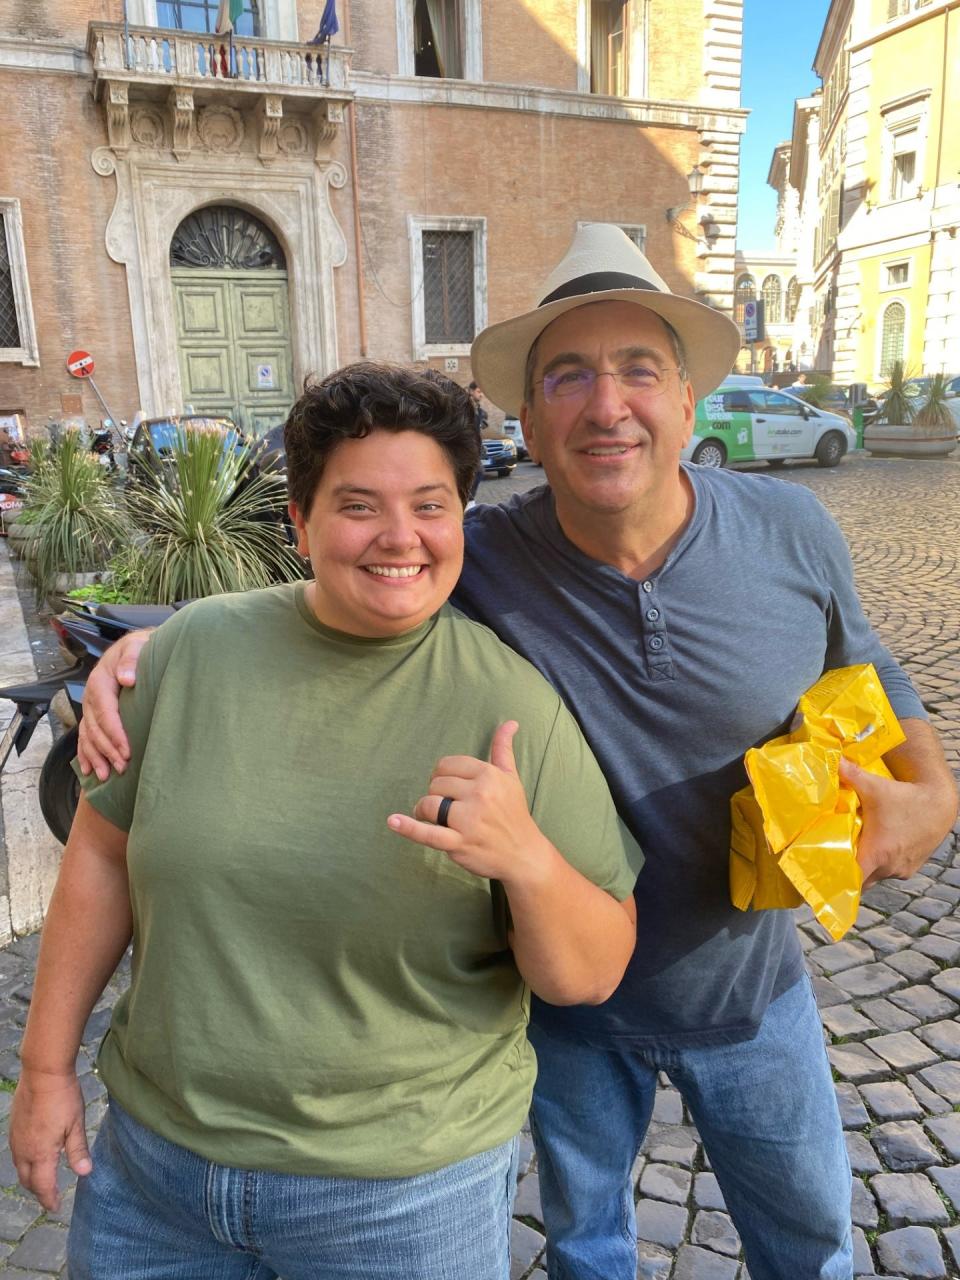 Chef Andrea Schnell and Sorelle co-owner Jon D'Allessandro pose for a photo in Piazza Sant'Eustachio in Rome during a trip to get inspiration for their restaurant.